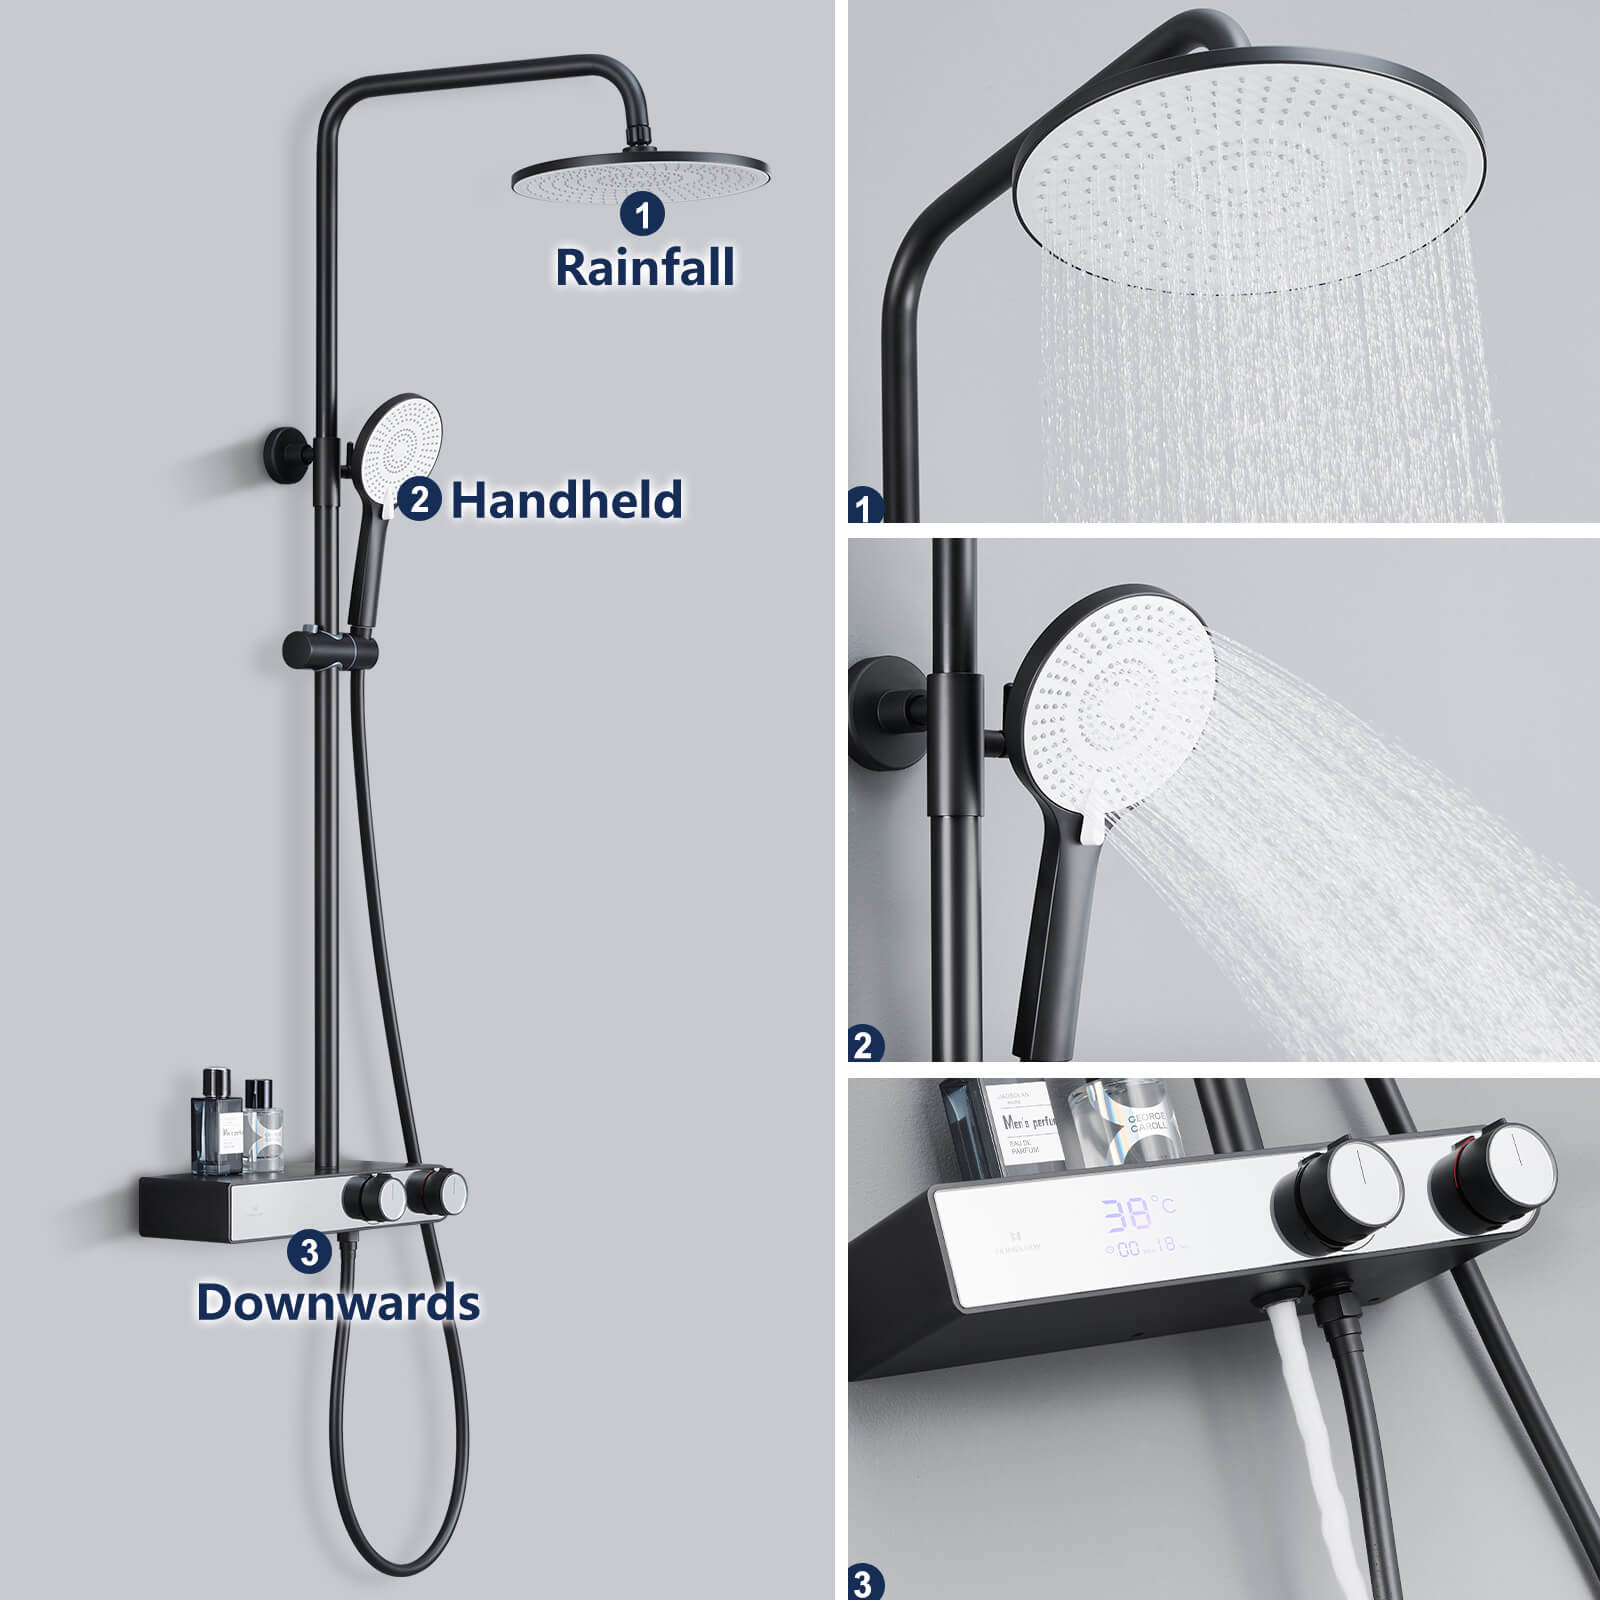 Homelody black shower system with LED temperature display. Adjustable shower rod with shelf